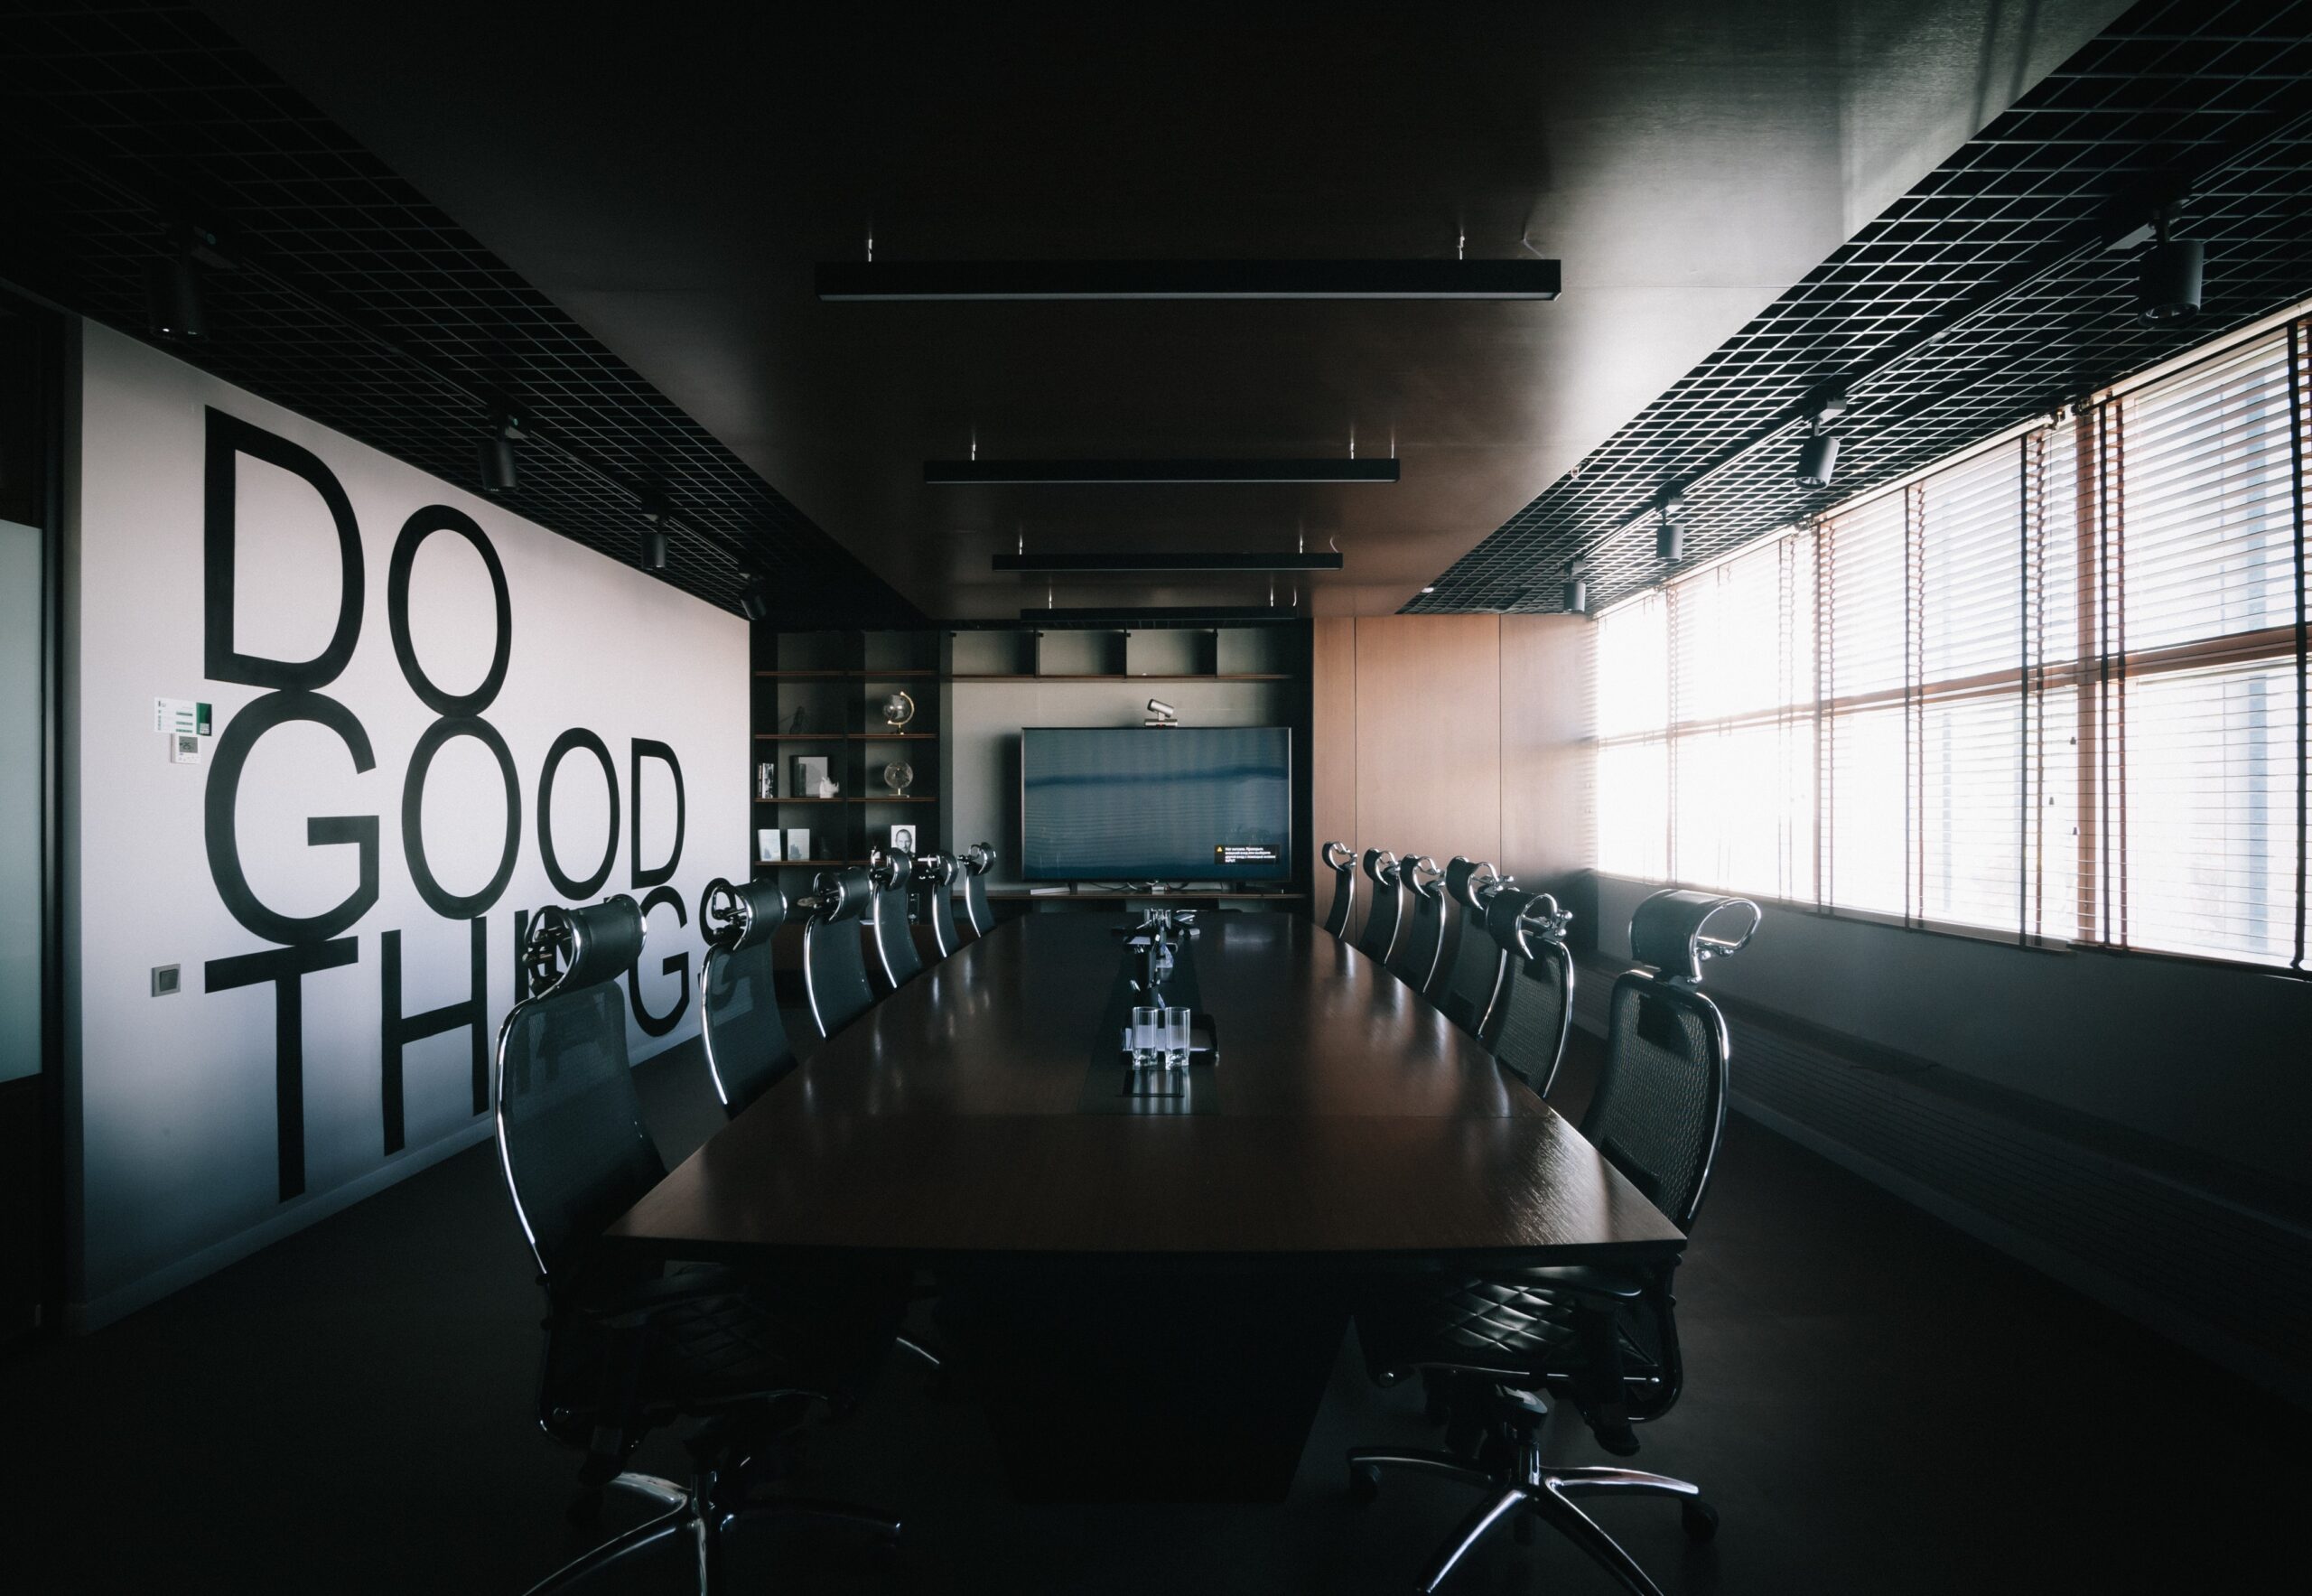 Empty board room with positive message on the wall